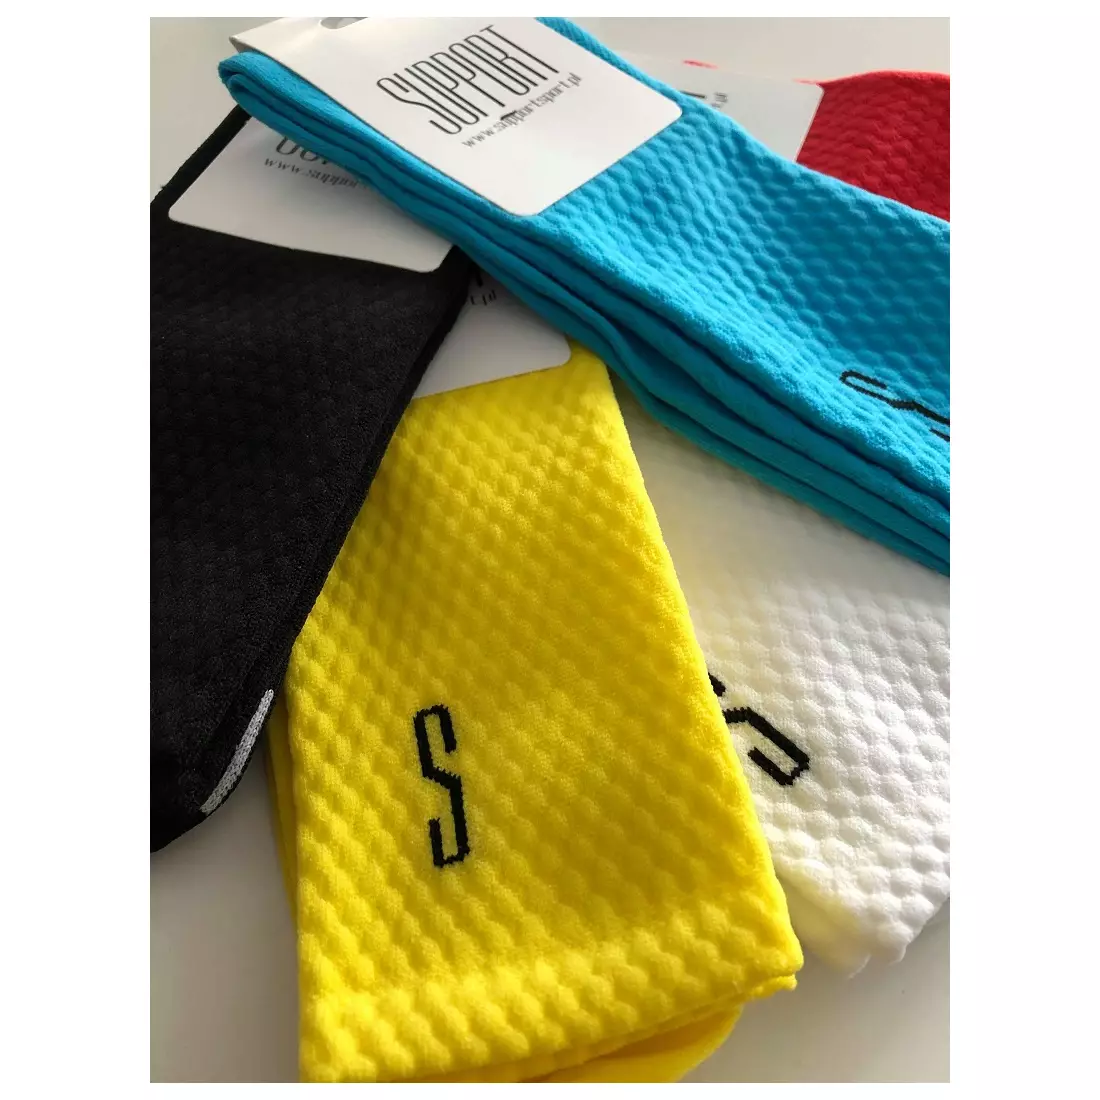 SUPPORT cycling socks YELLOW'S